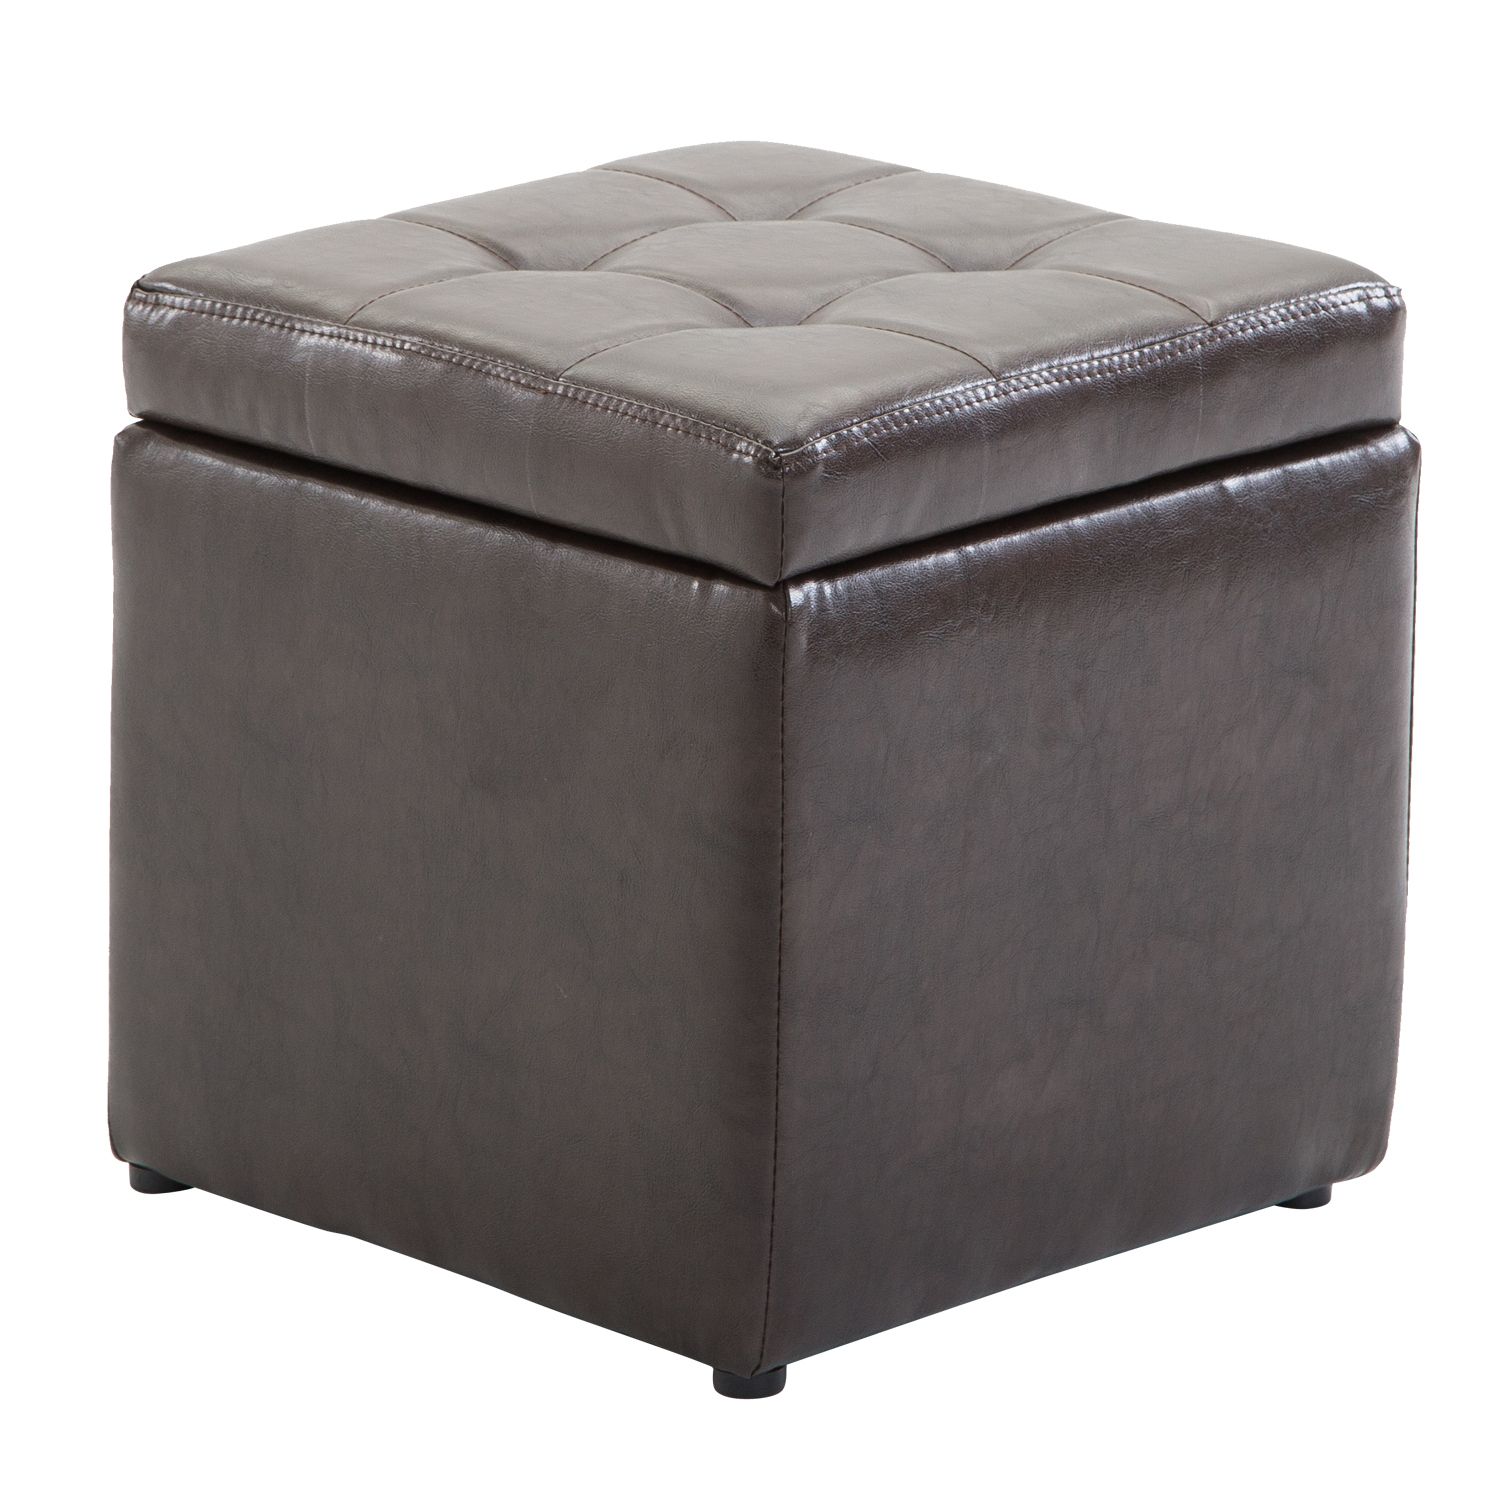 Homcom 16" Cube Faux Leather Tufted Storage Ottoman Footrest Seat Intended For Dark Brown Leather Pouf Ottomans (View 10 of 20)